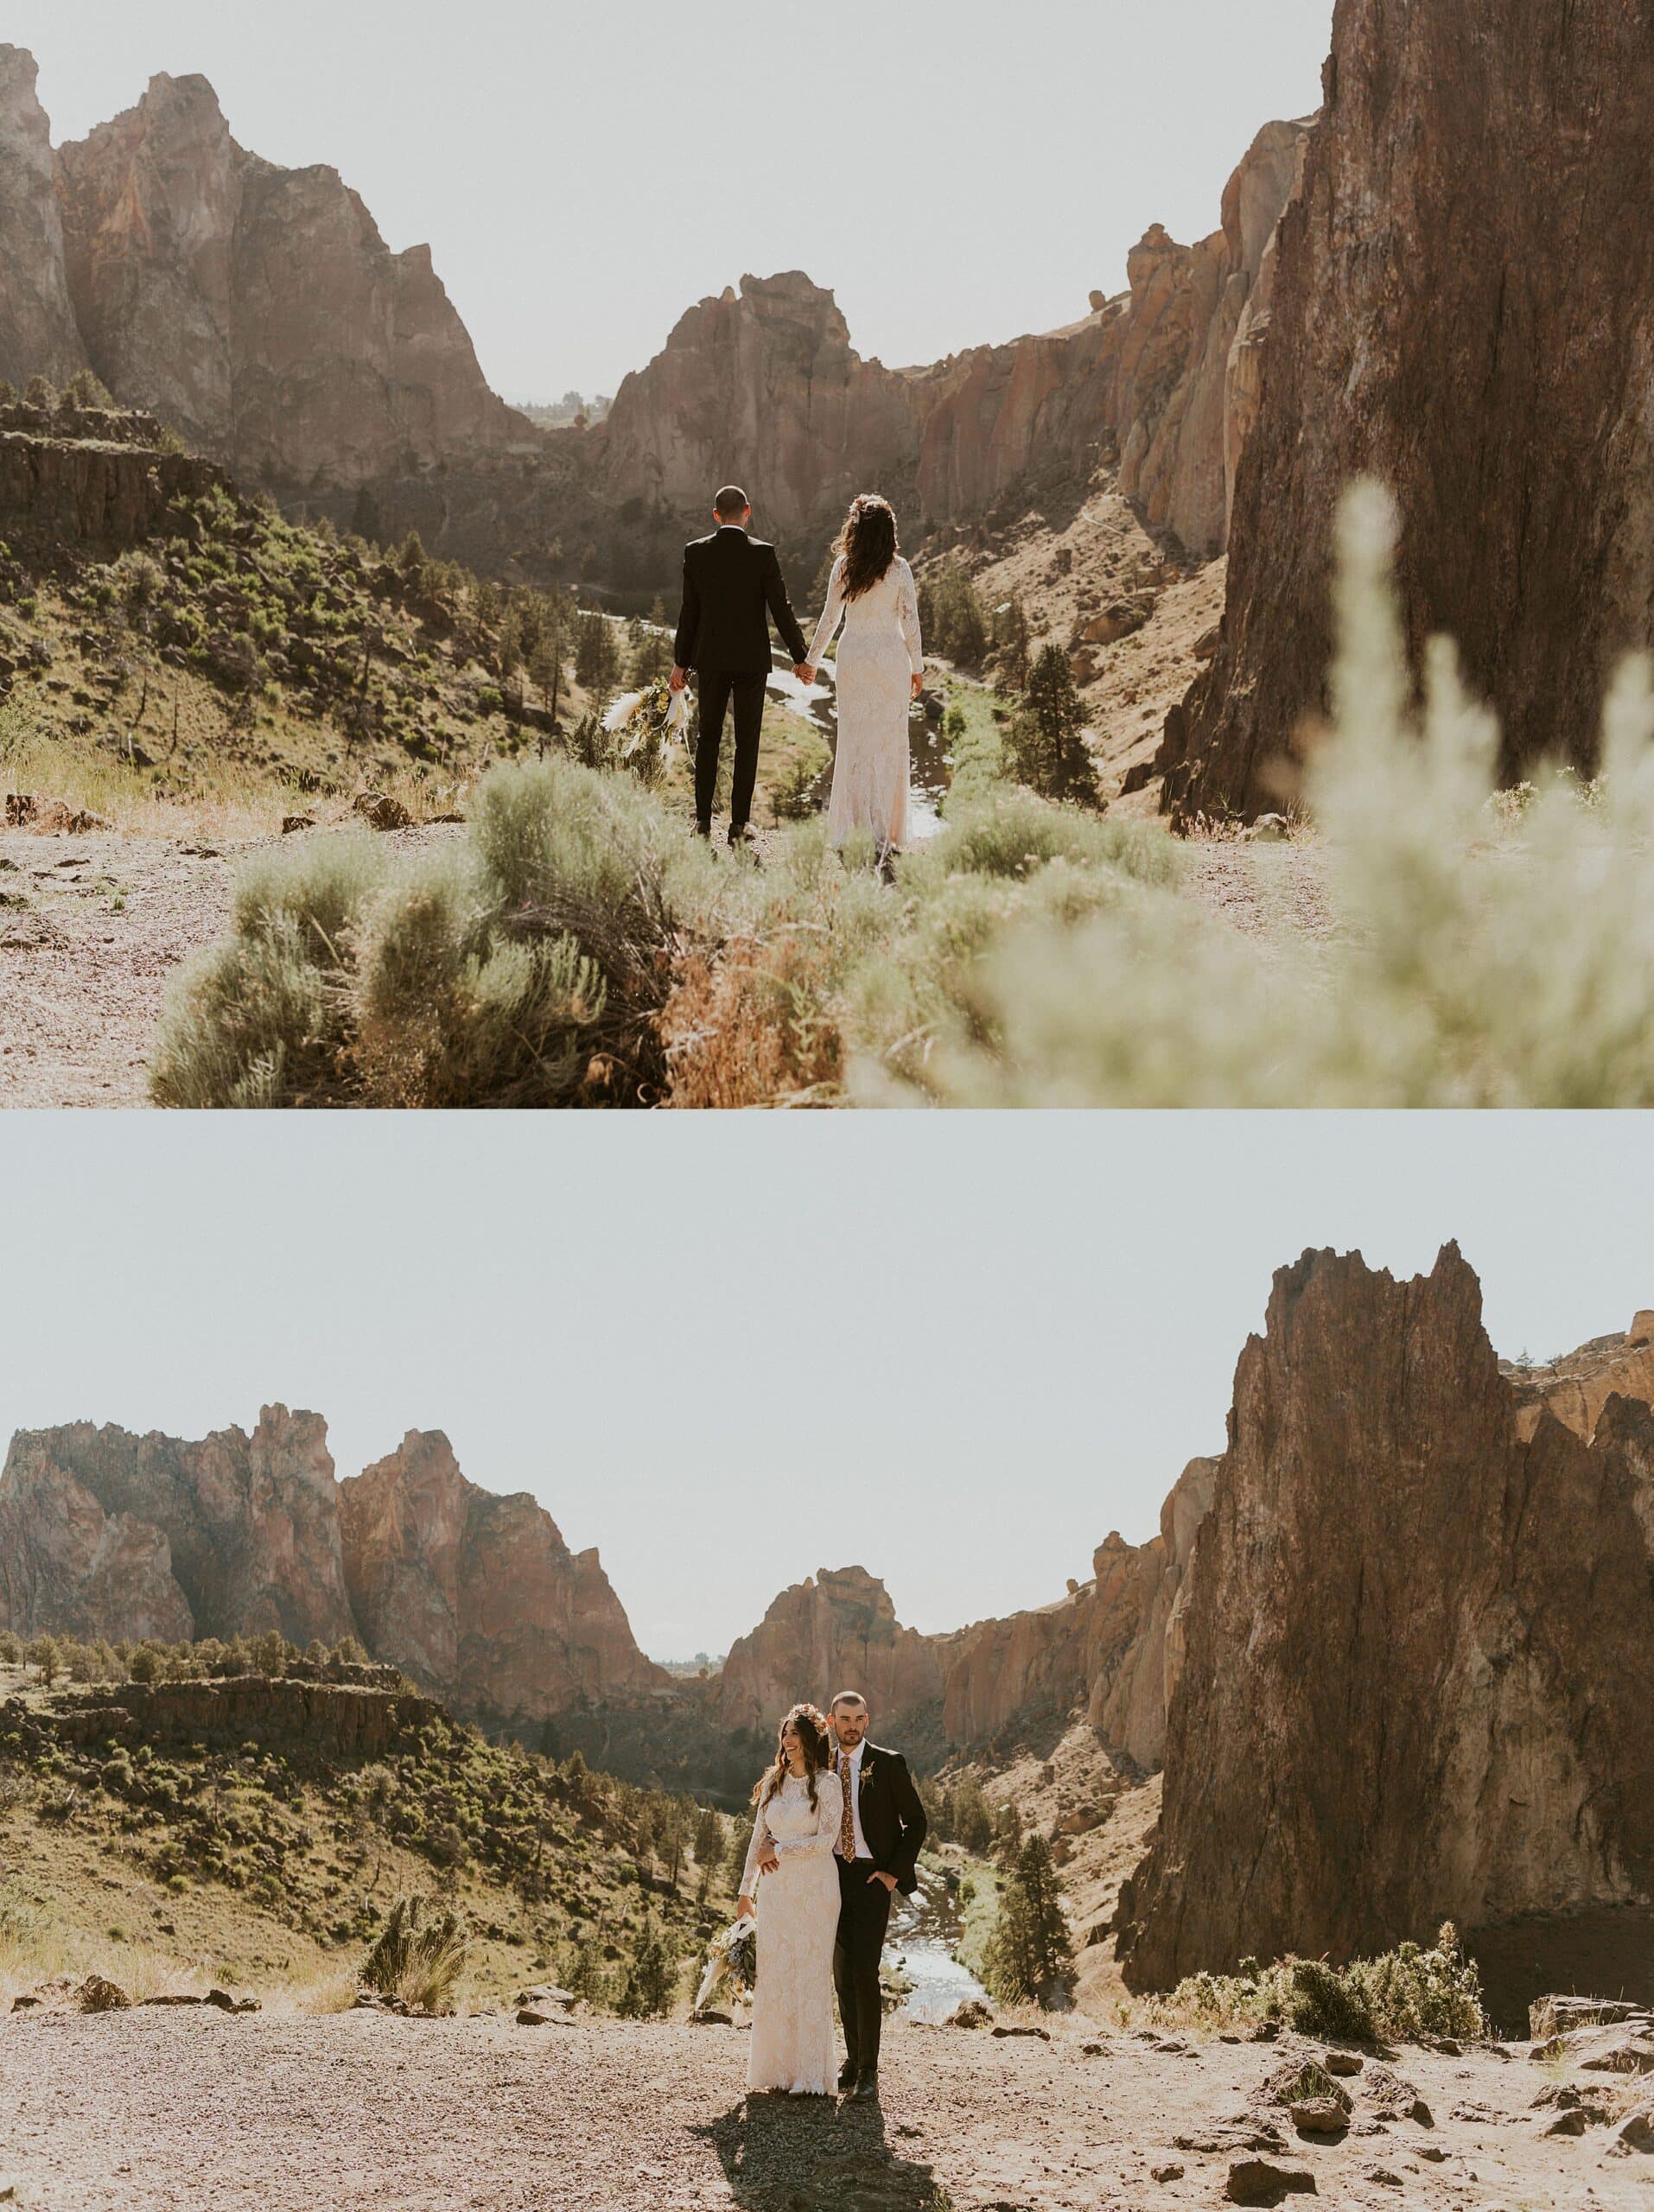 bride and groom standing together mountain and desert smith rock state park landscape

